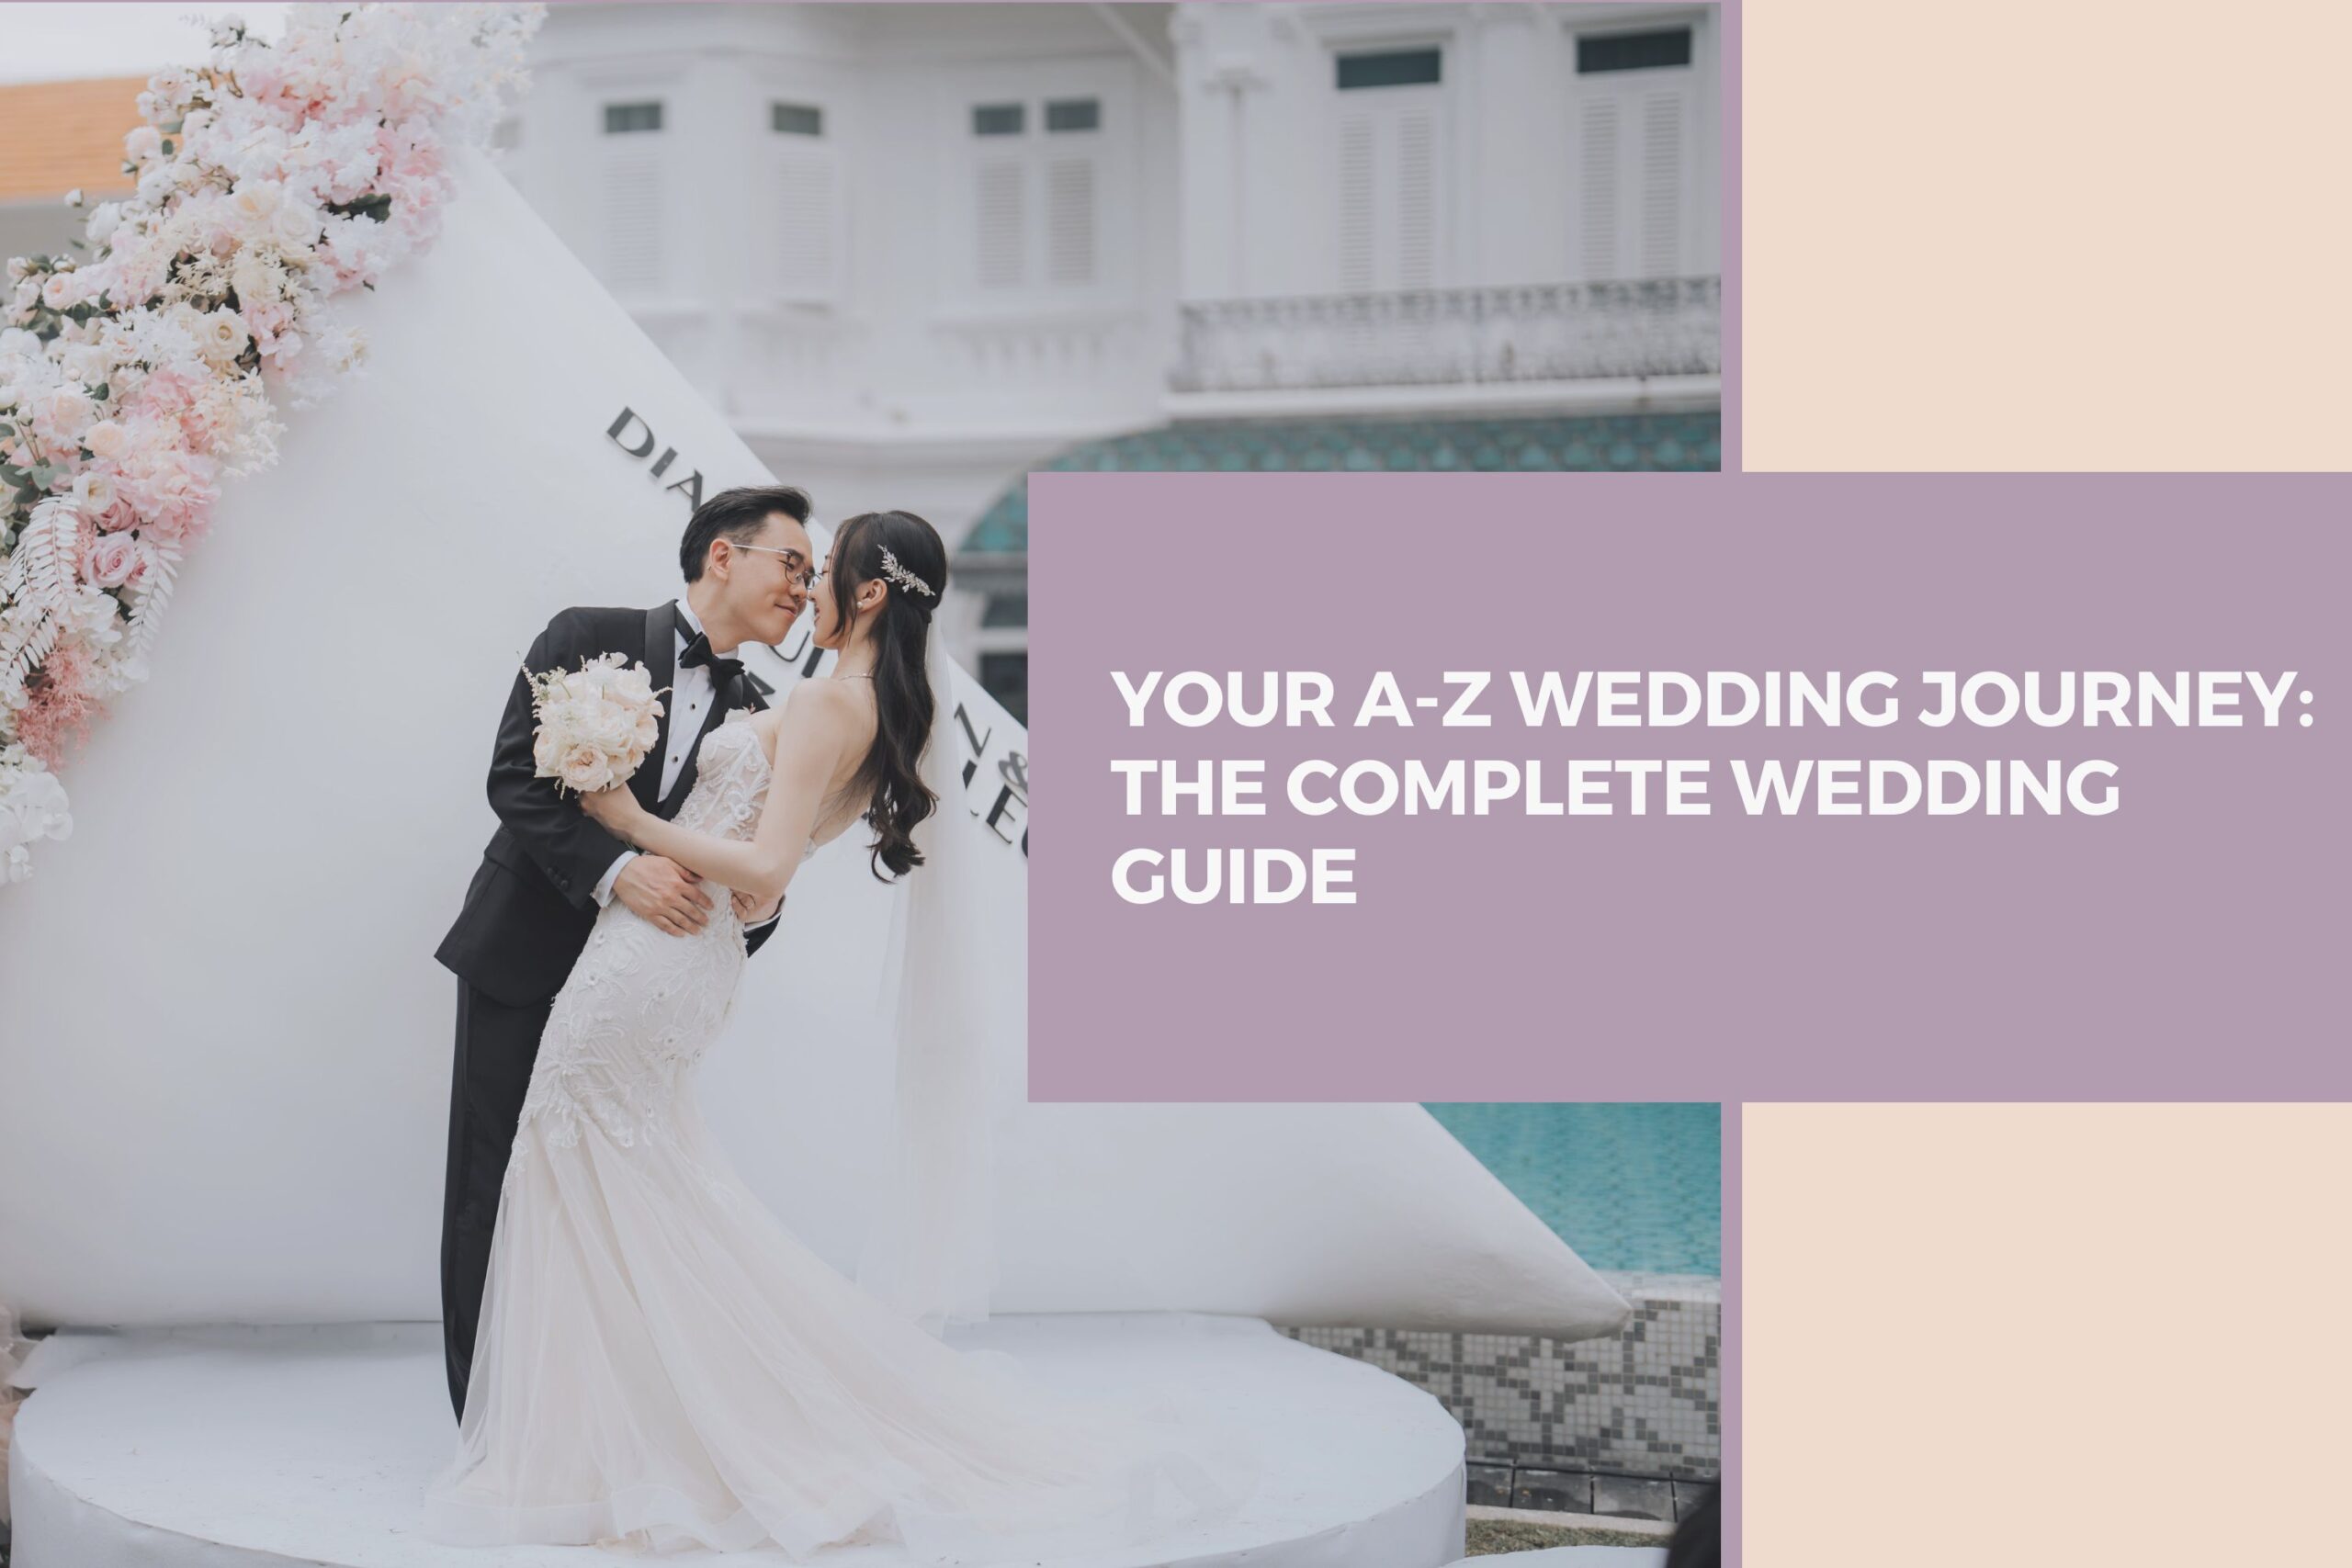 Your A-Z Wedding Journey: The Complete Wedding Guide